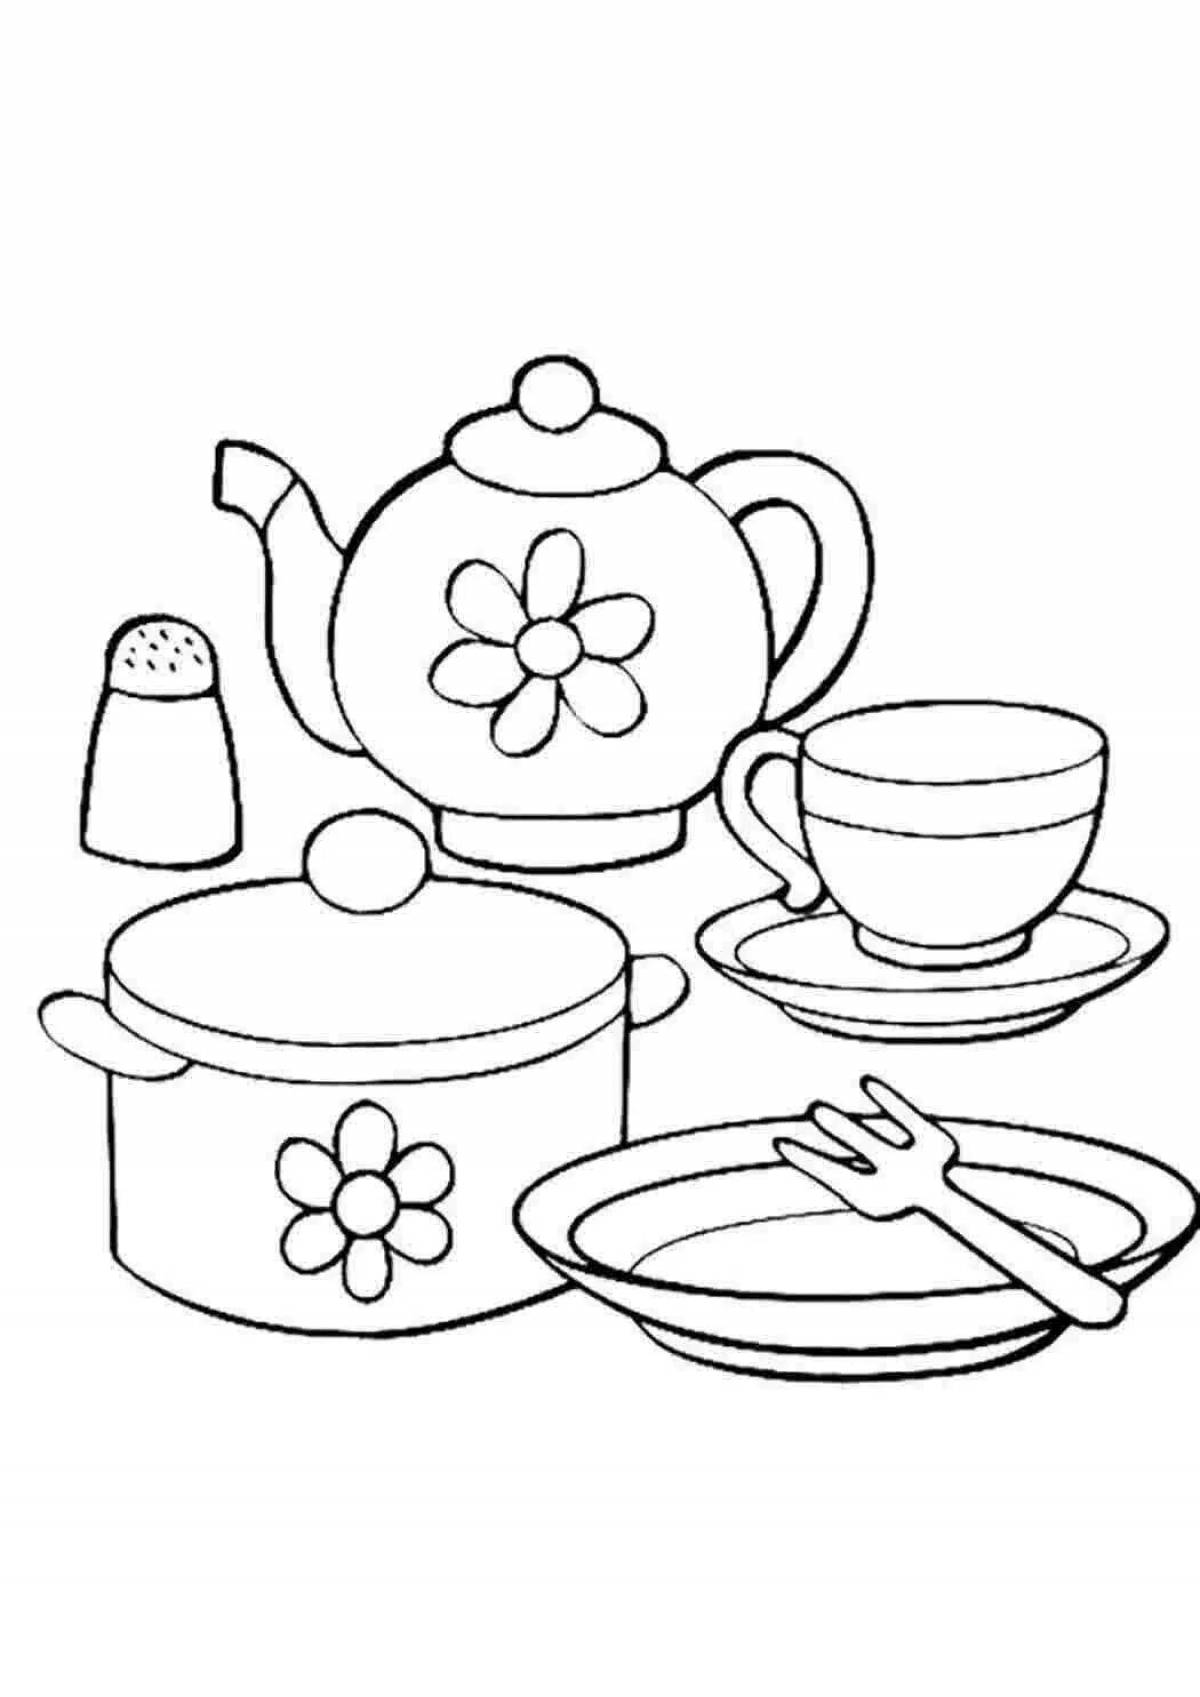 Attractive dishes and food coloring page